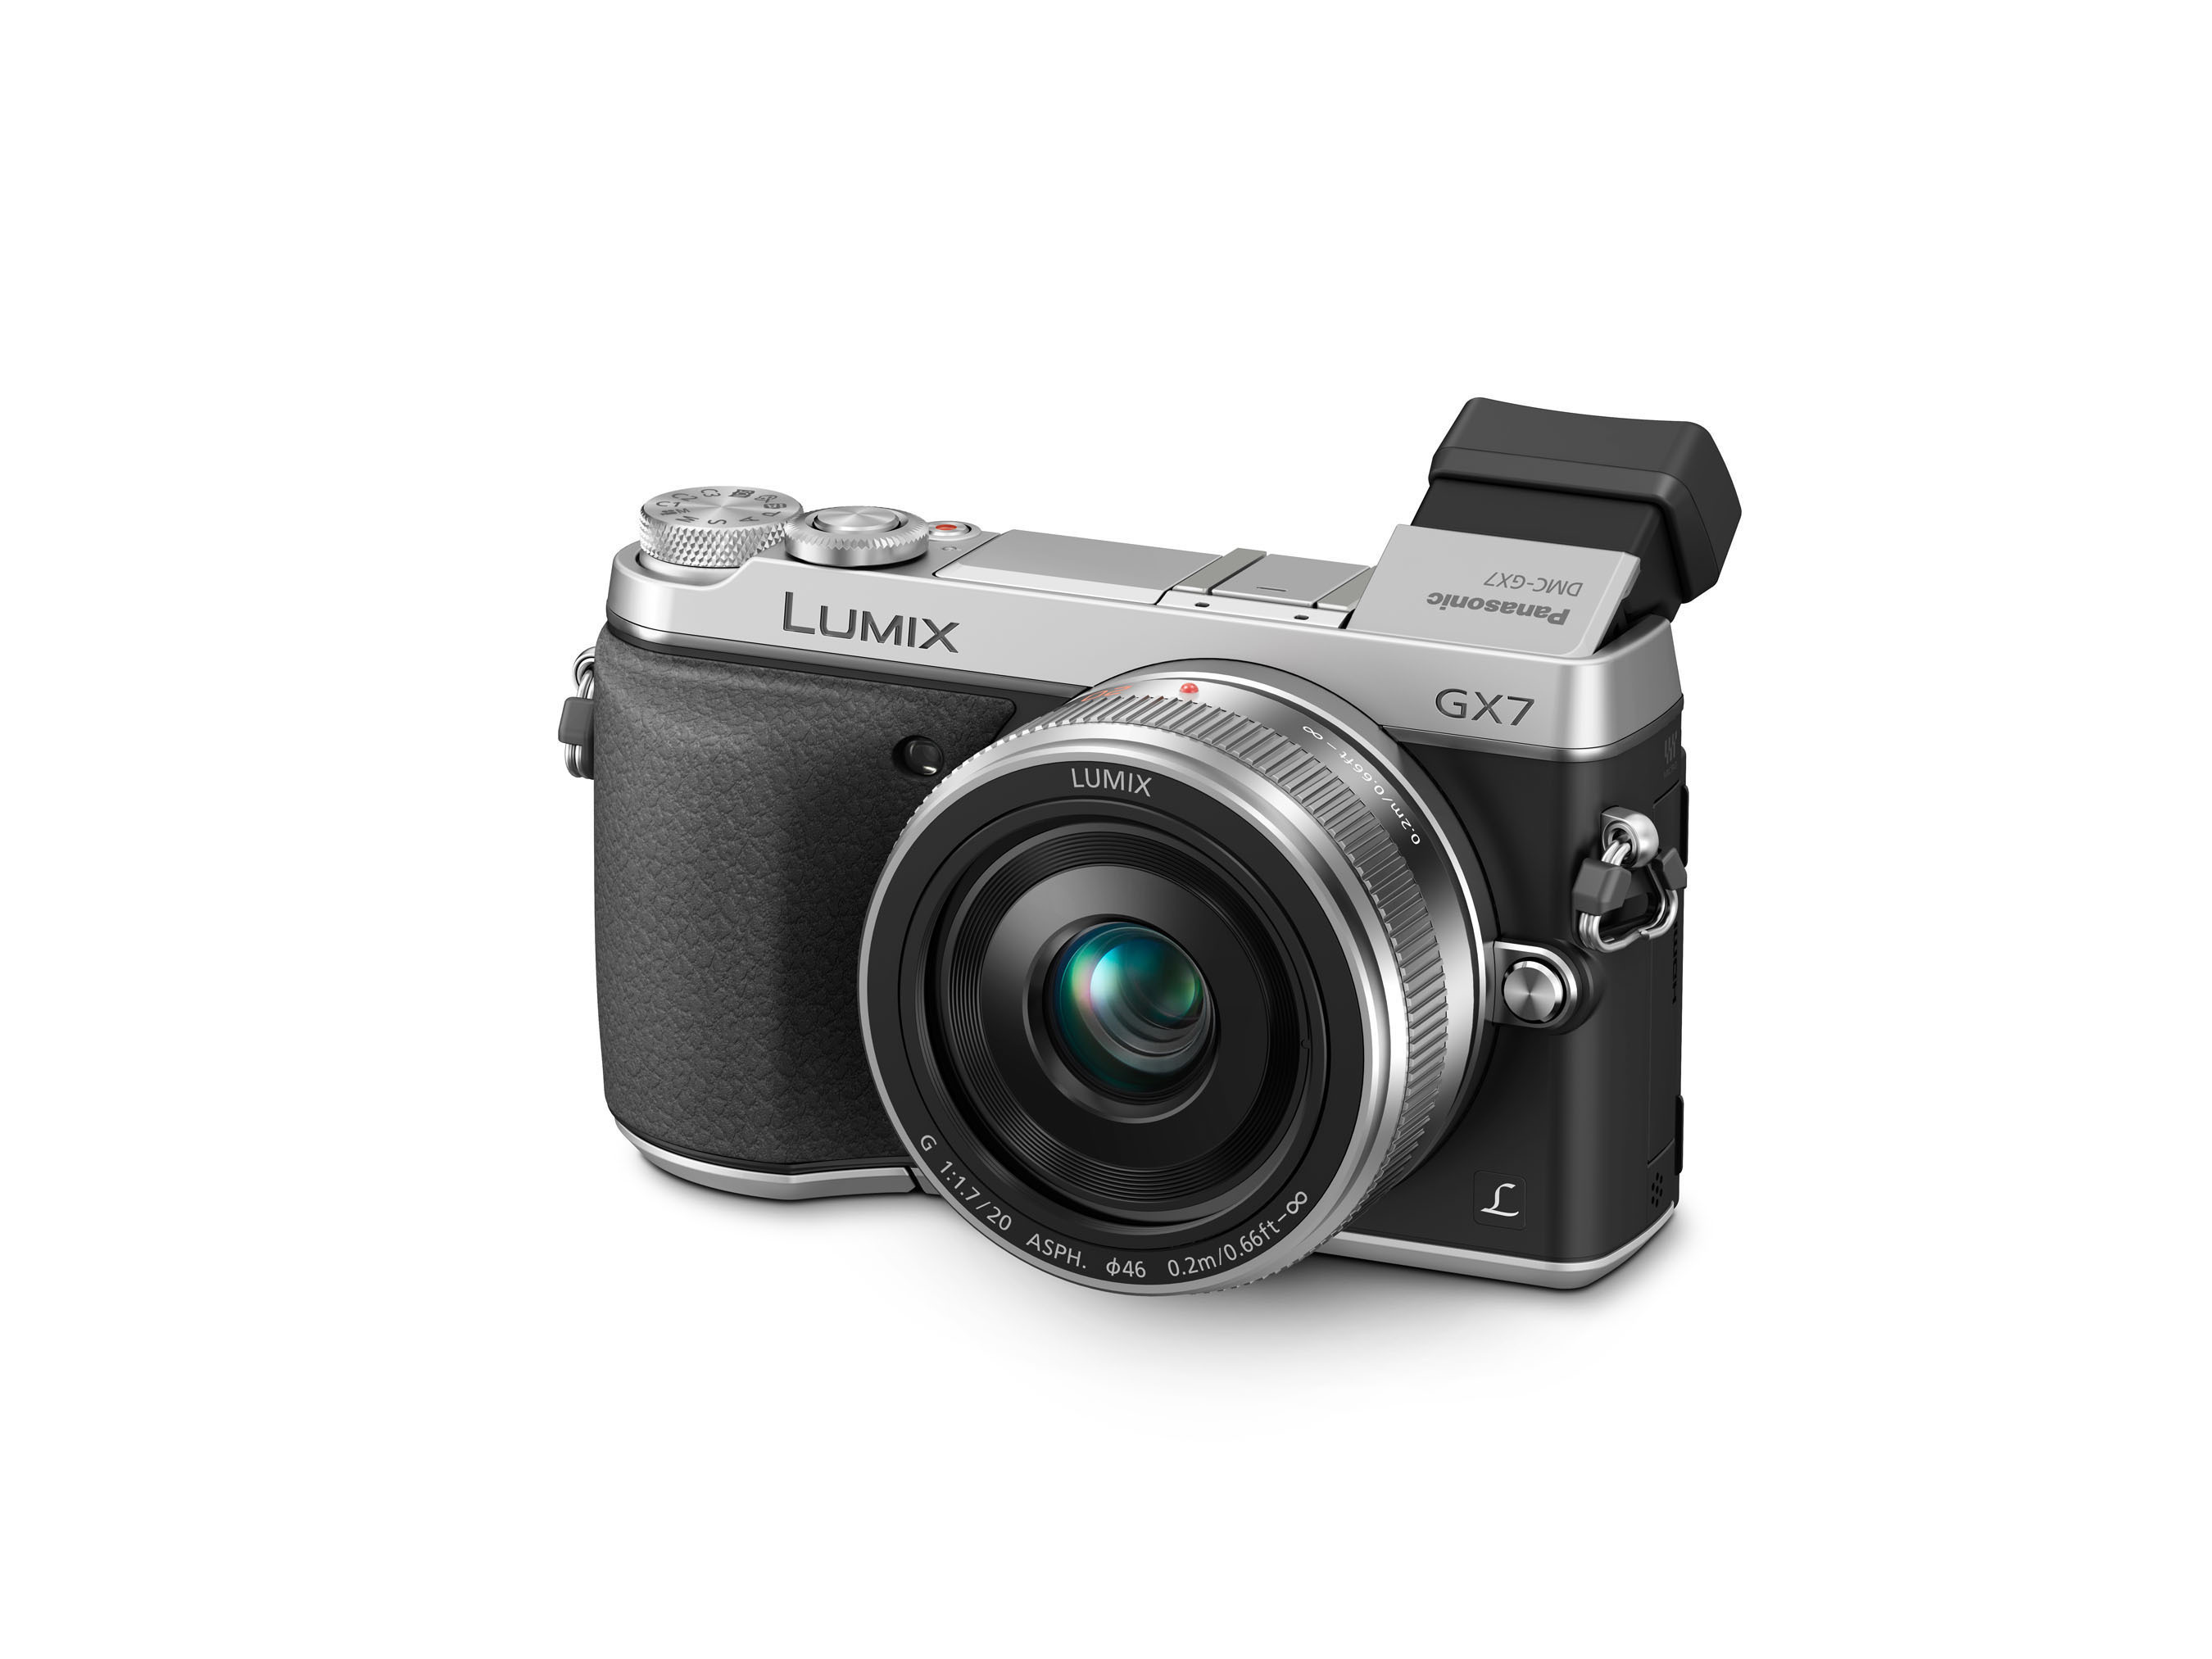 Change your Perspective with the New LUMIX DMC-GX7 DSLM (Digital Single Lens Mirrorless). (PRNewsFoto/Panasonic) (PRNewsFoto/PANASONIC)